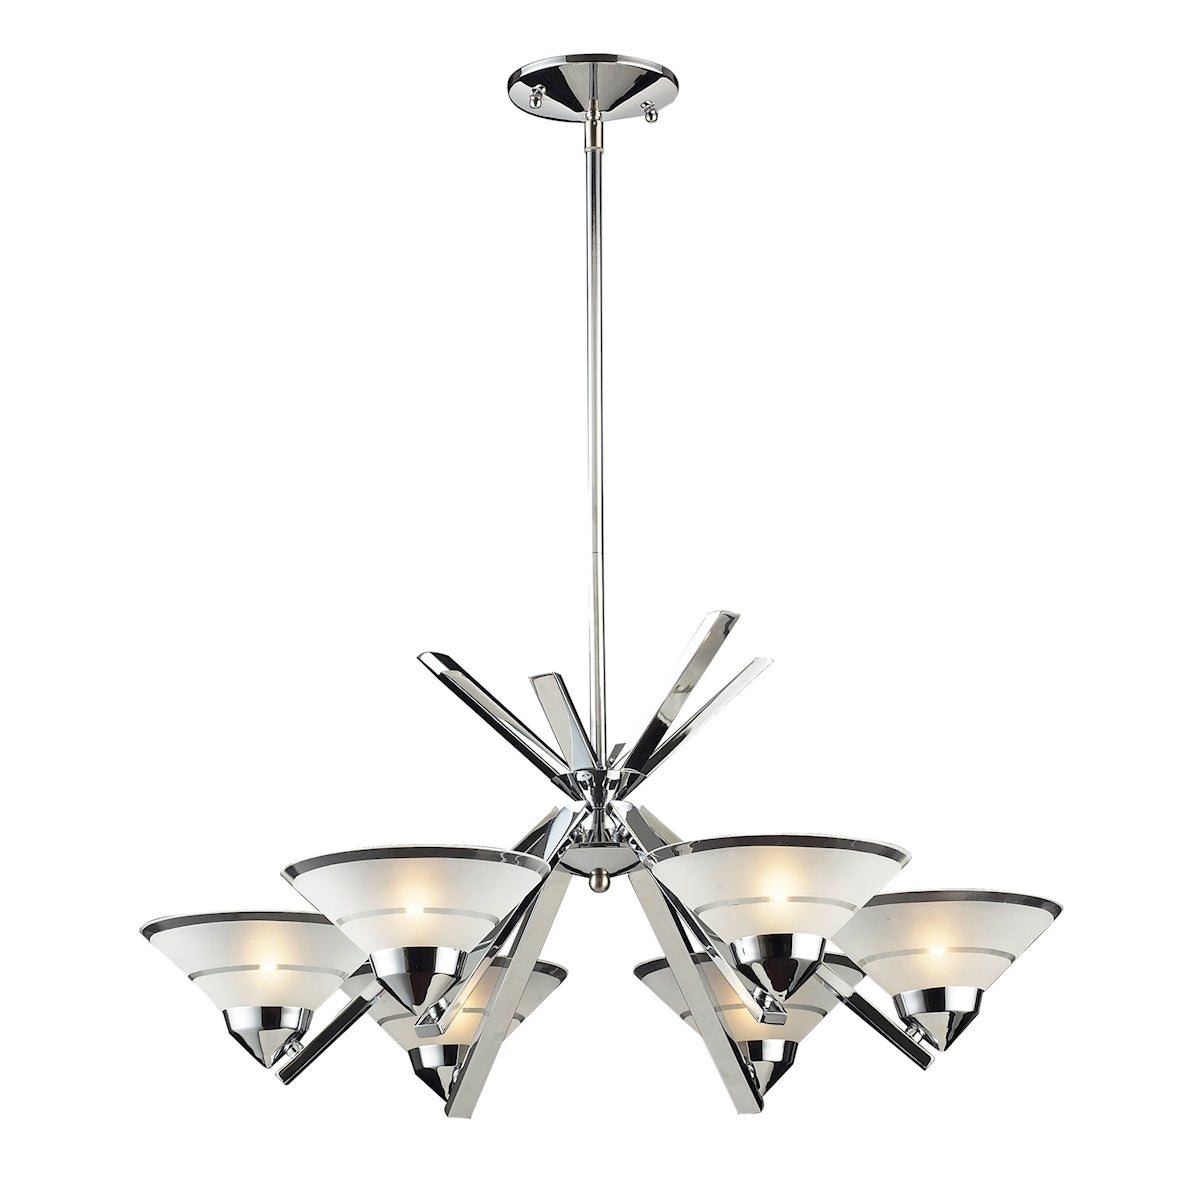 Refraction 6-Light Chandelier in Polished Chrome with Satin Glass